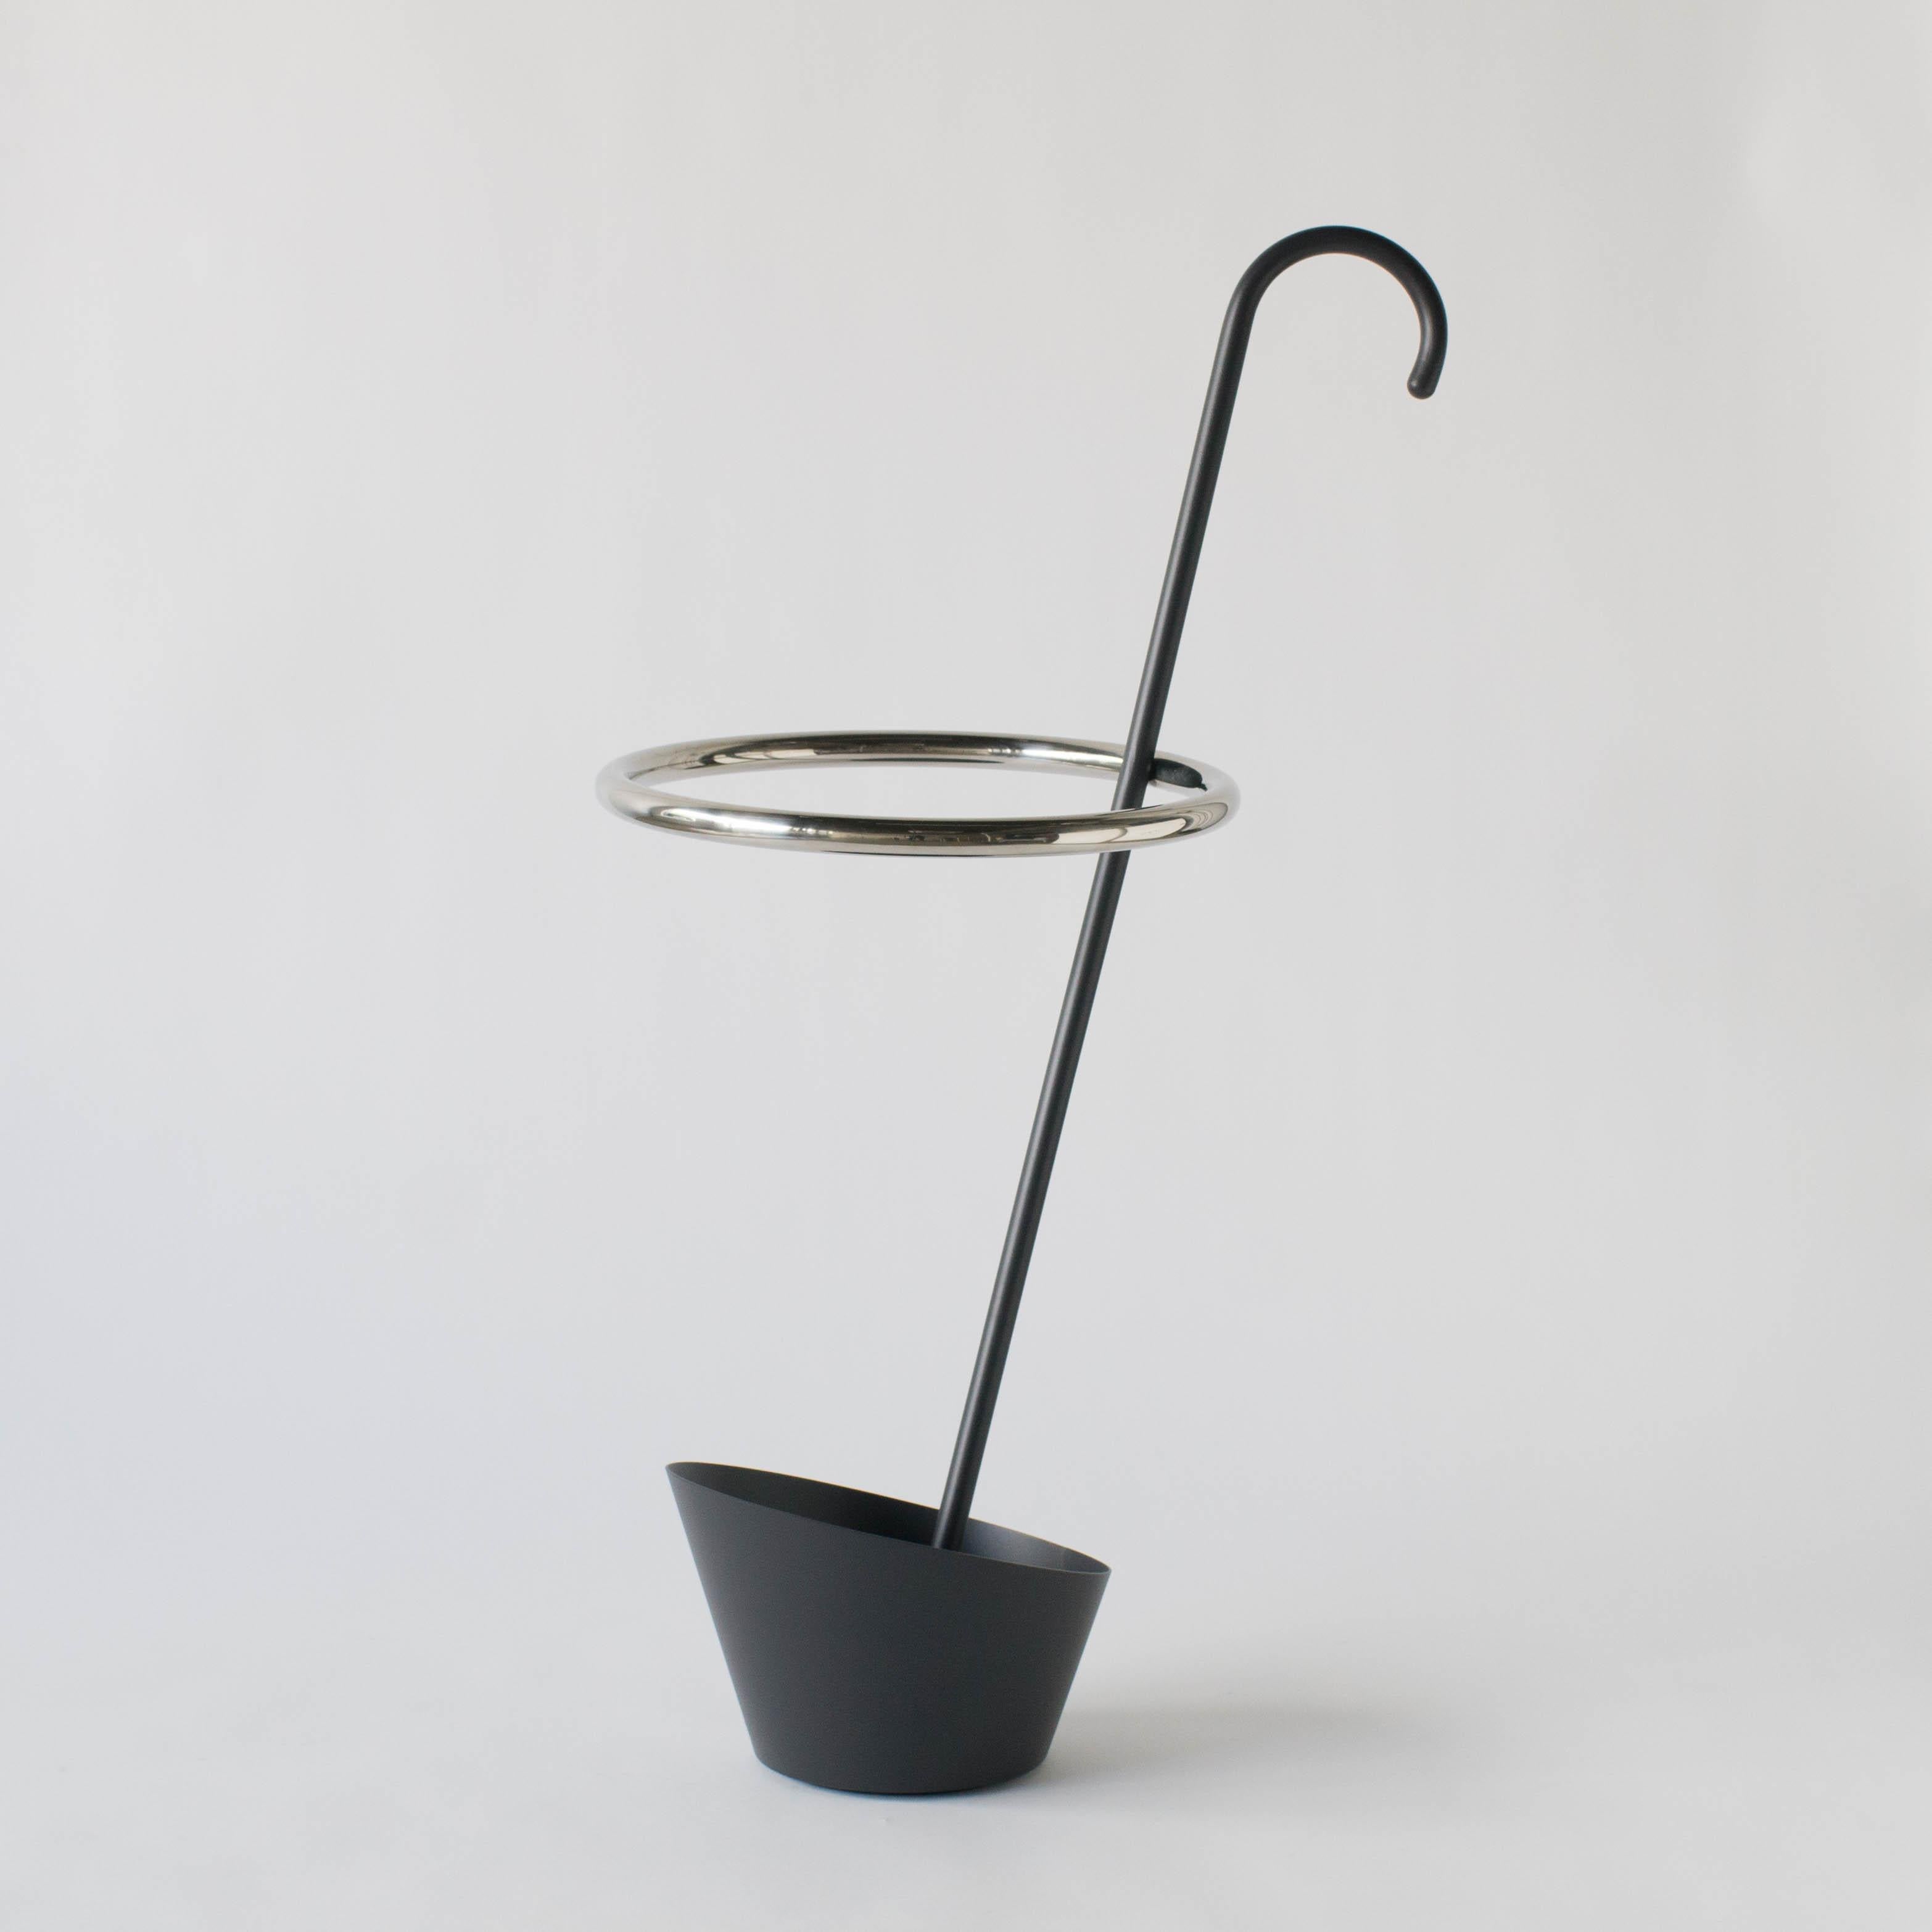 Shiro Kuramata umbrella stand. Made by stainless steel. Base and bar are black painted stainless steel. New piece.
Designed by Shiro Kuramata in the 80s. He designed this umbrella stand with his humor. While umbrellas are put in it, black curved